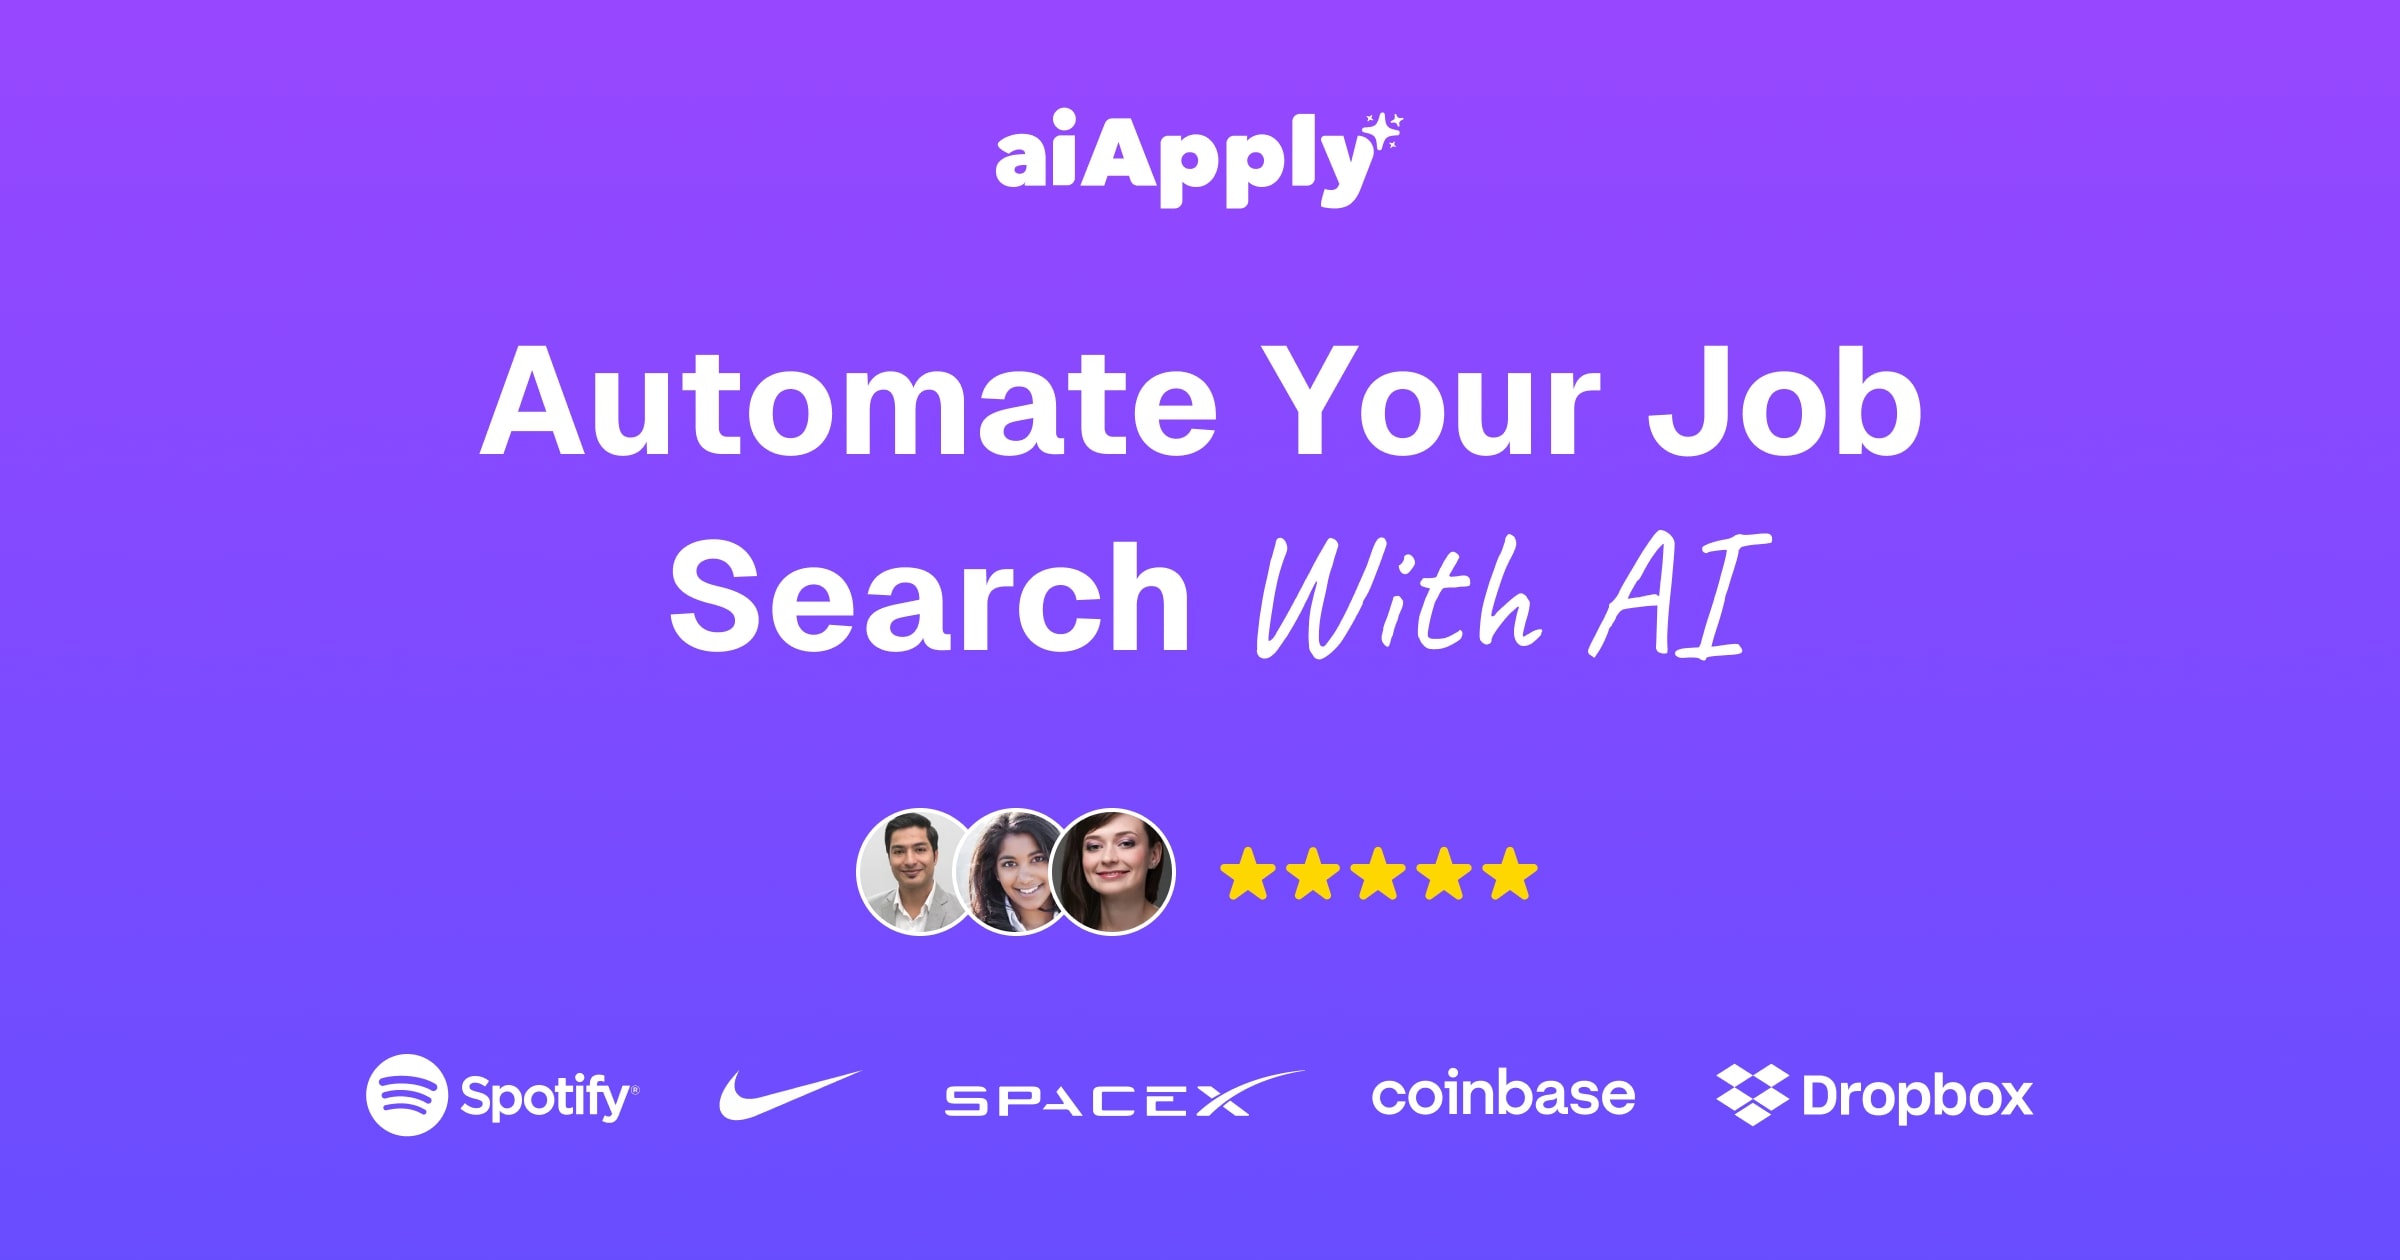 aiapply.co